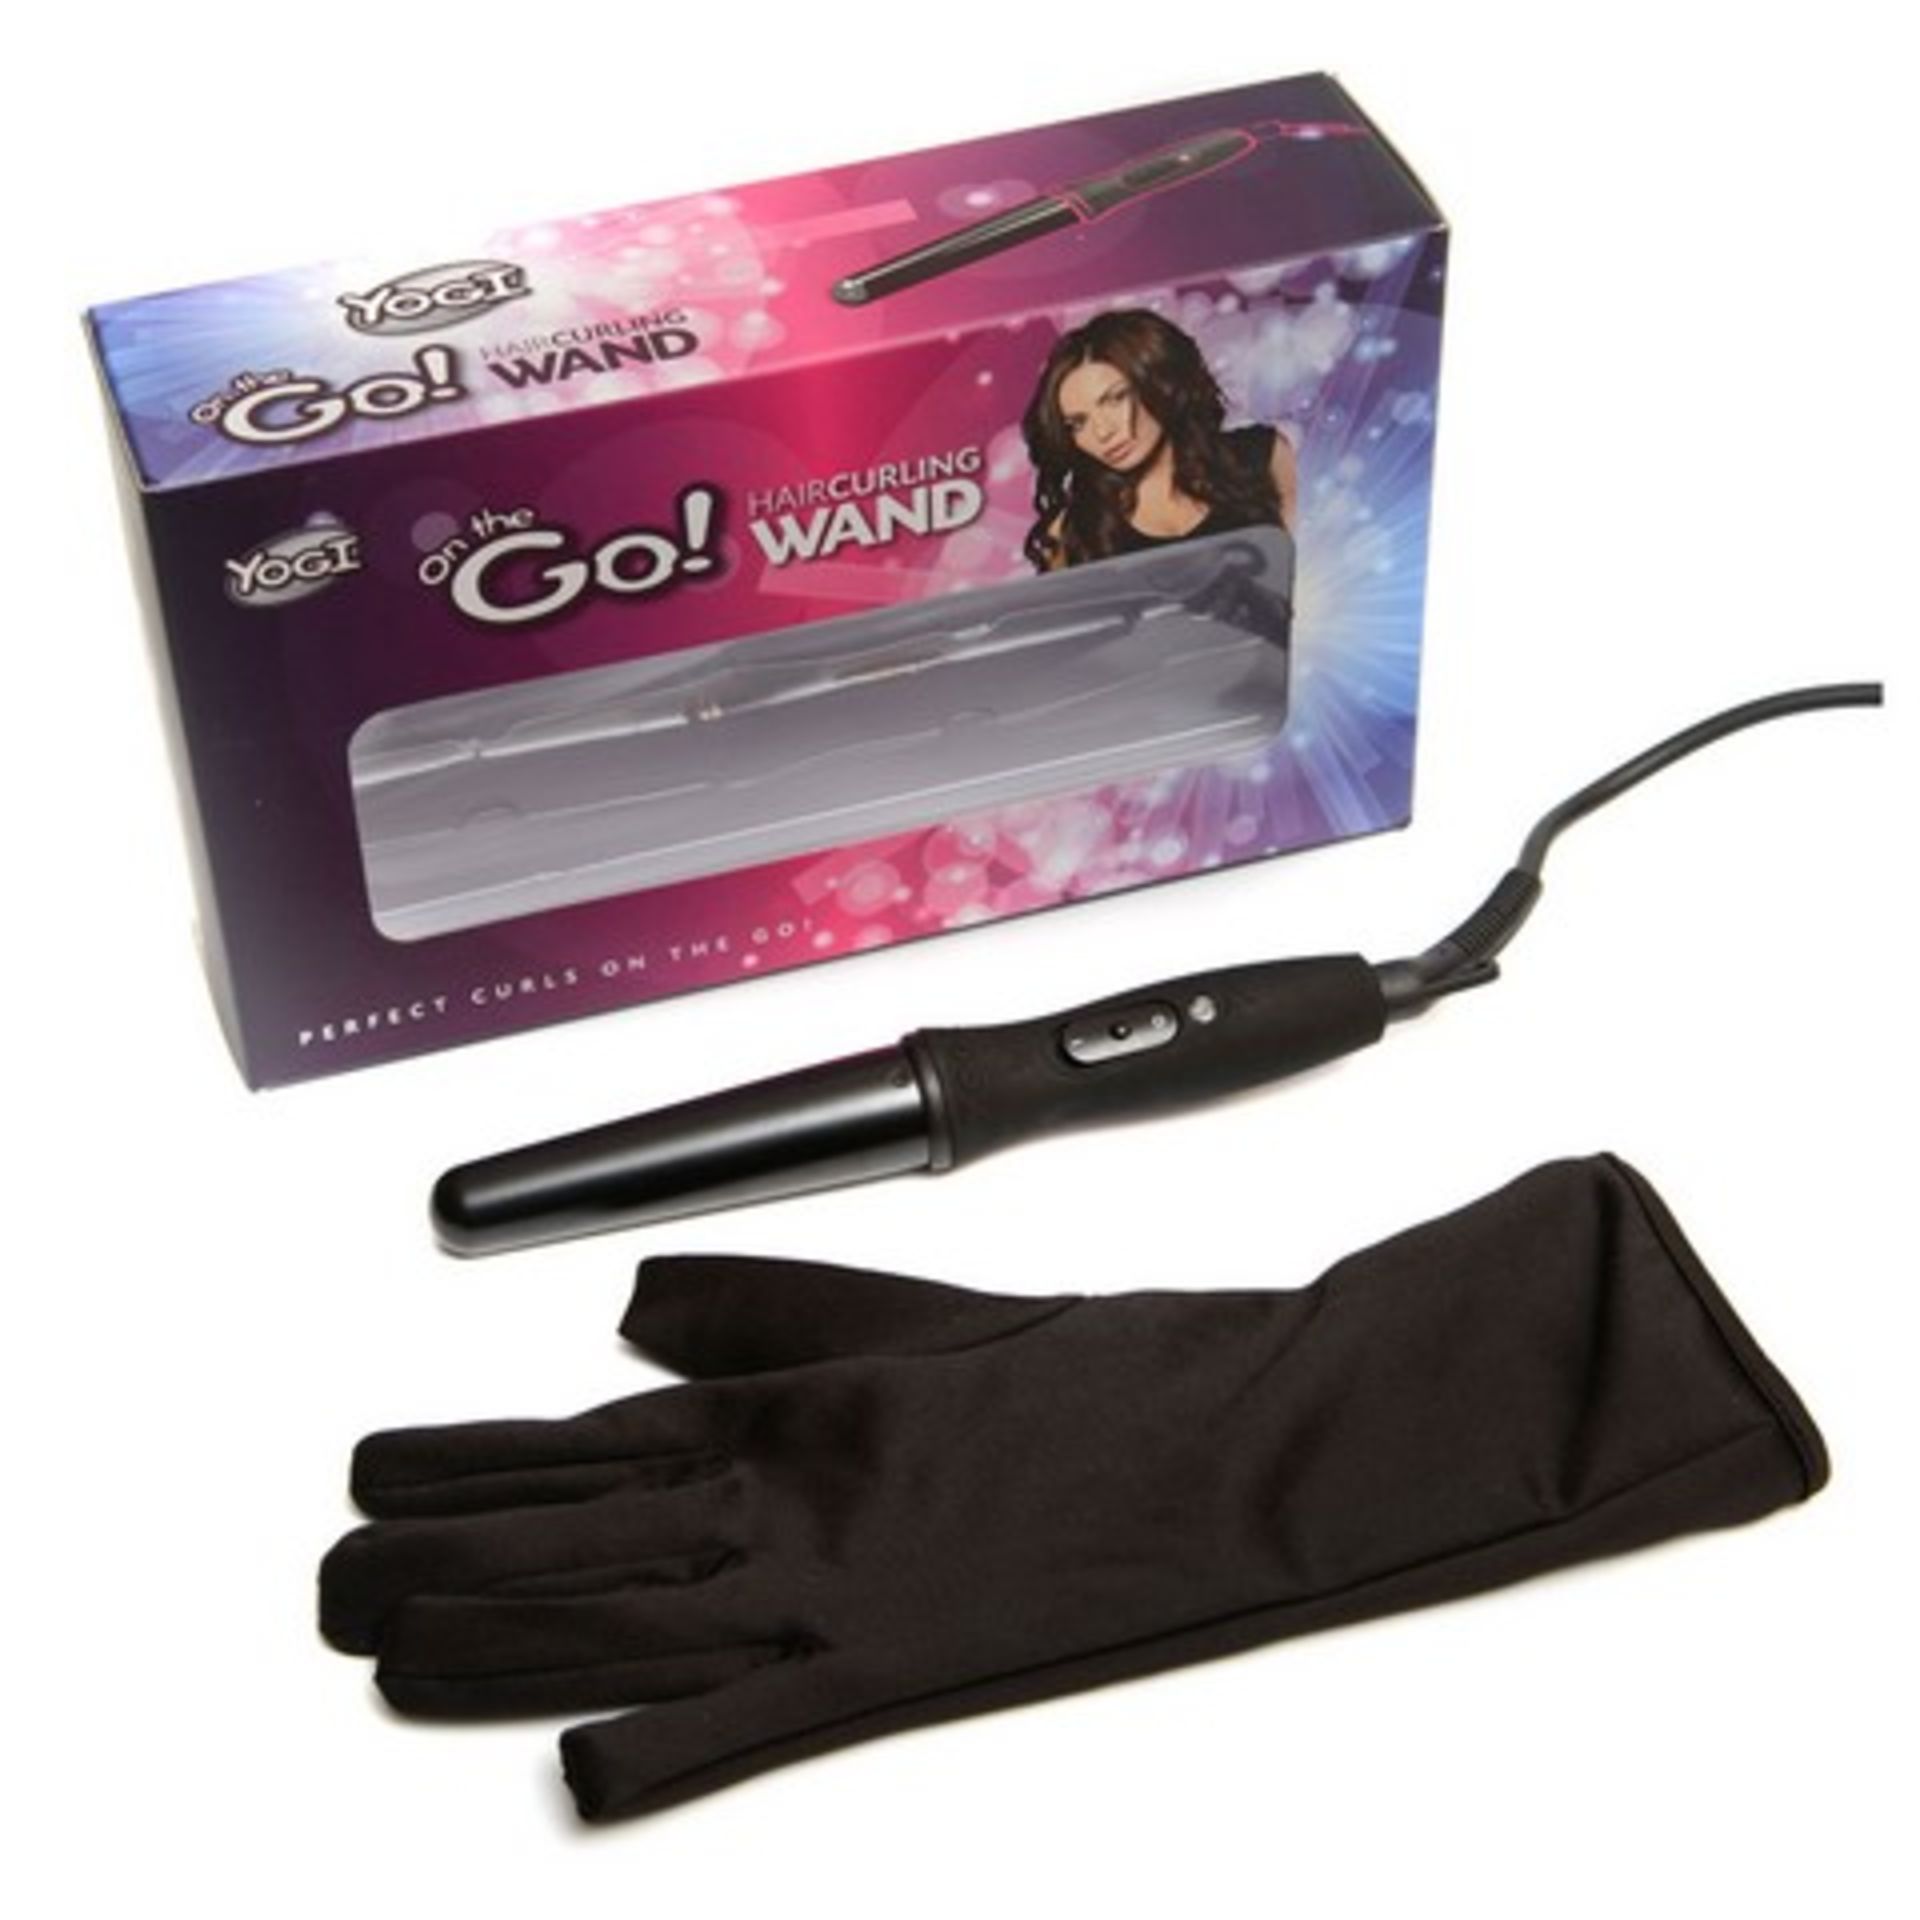 + VAT Brand New Yogi On-The-Go! Hair Curling Wand With Safety Glove - Tourmaline & Ceramic Barrel